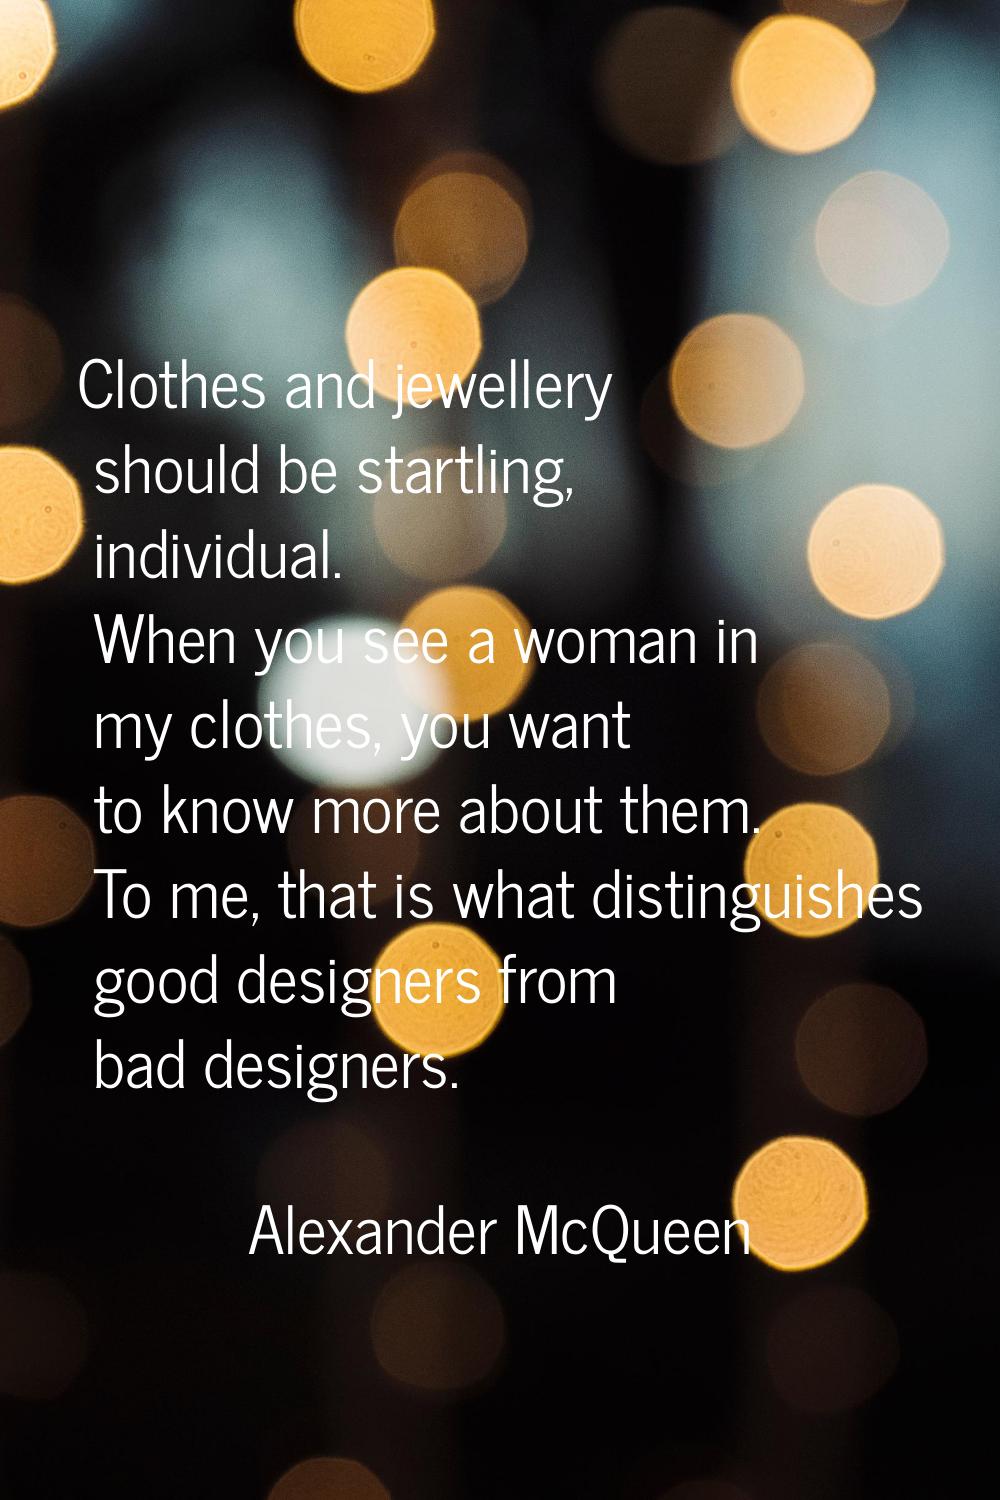 Clothes and jewellery should be startling, individual. When you see a woman in my clothes, you want